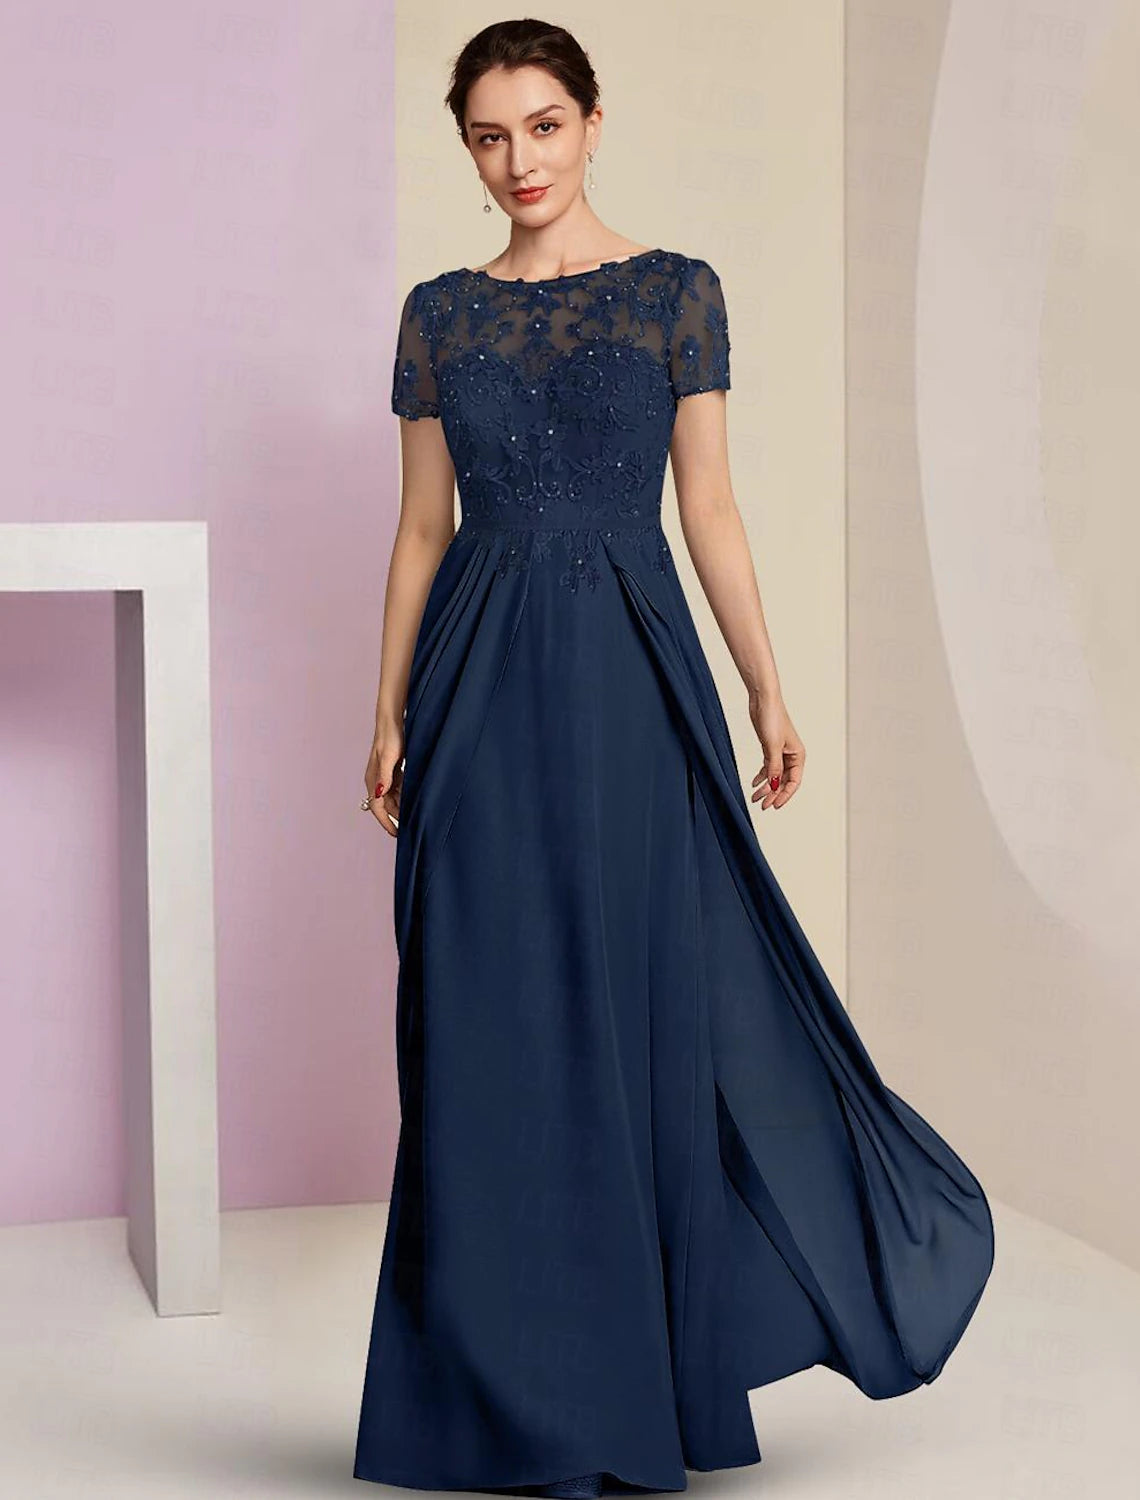 A-Line Mother of the Bride Dress Formal Wedding Guest Elegant Bateau Neck Floor Length Chiffon Lace Short Sleeve with Lace Beading Embroidery